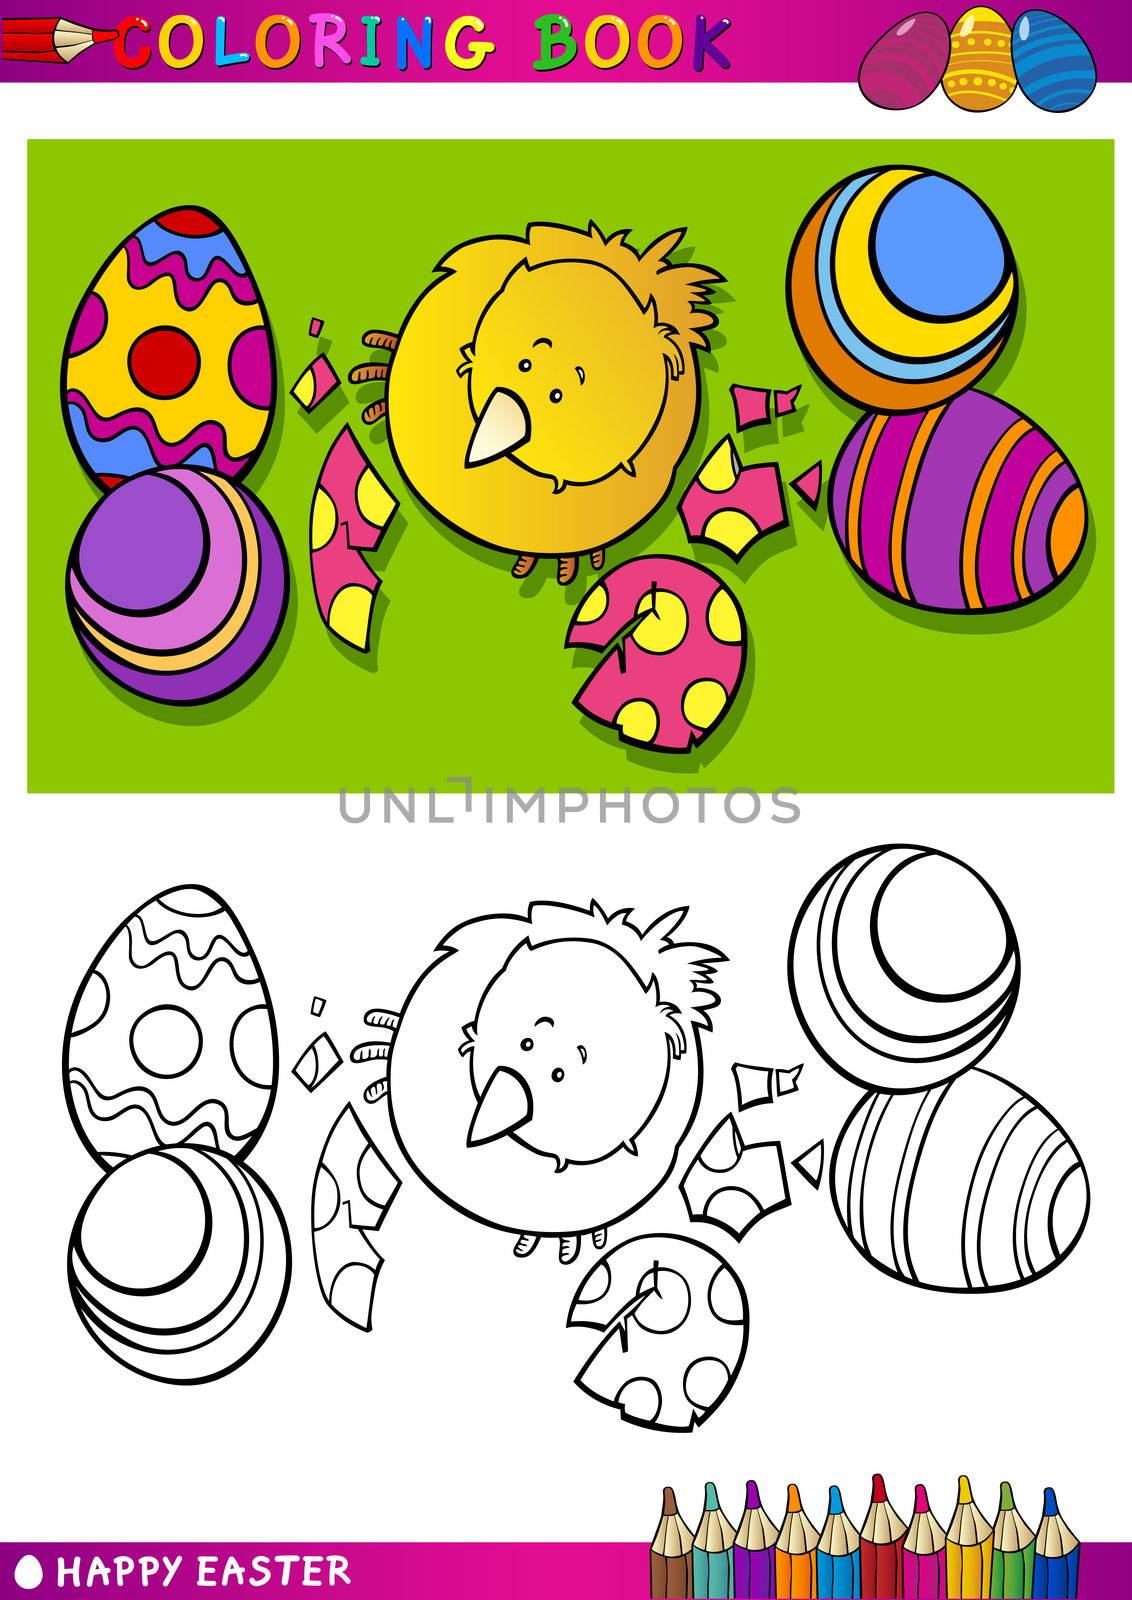 Coloring Book or Page Cartoon Illustration of Easter Little Chick or Chicken hatched from Egg and Painted Easter Eggs